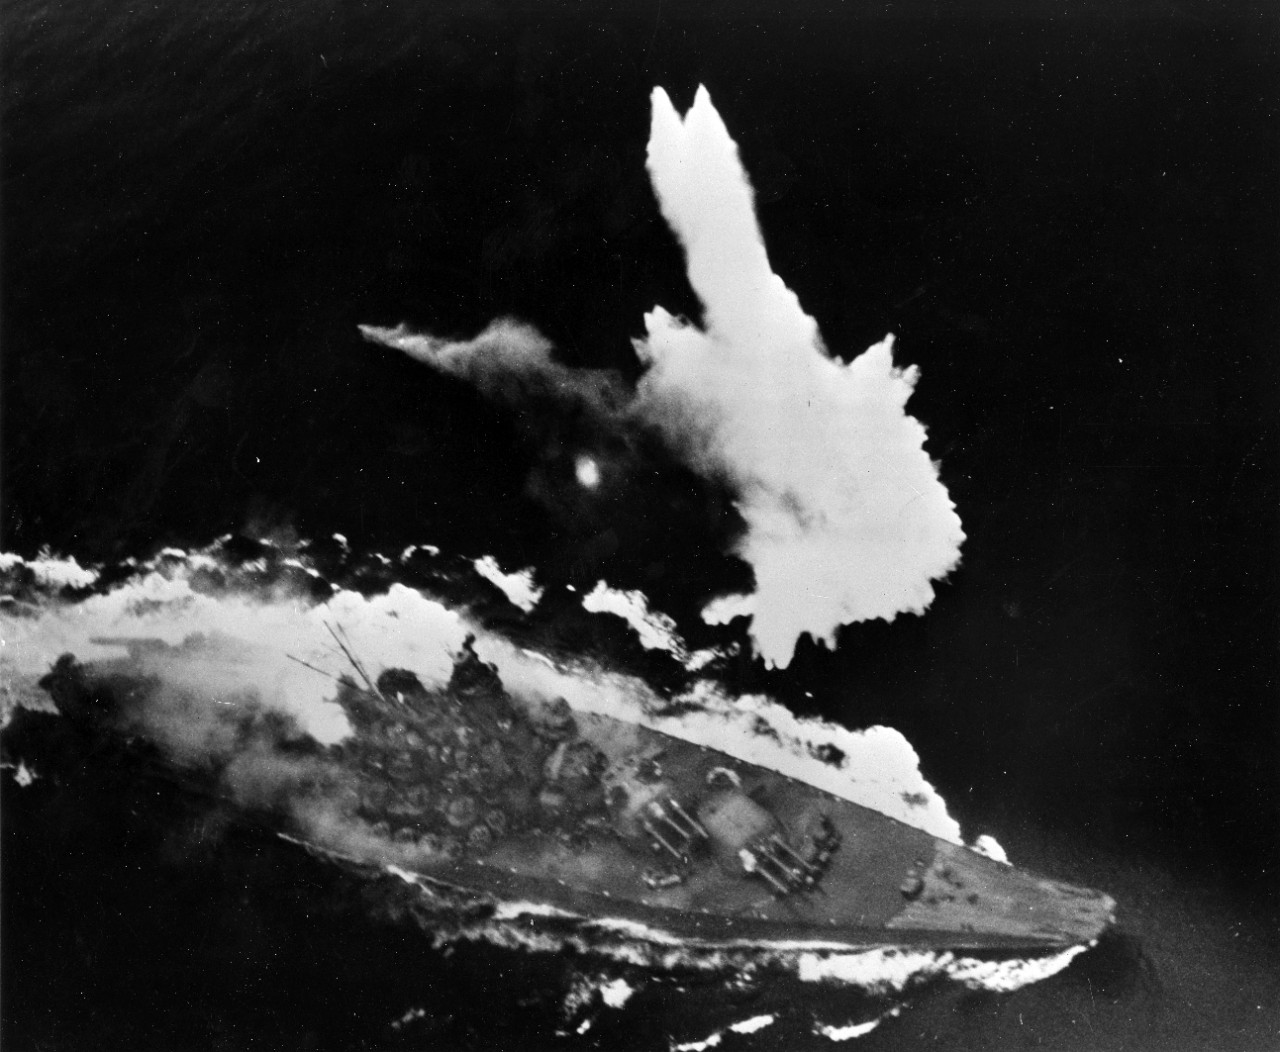 Yamato maneuvers frantically under attack as a bomb explodes off its port side. The fire in the area of the 6.1 inch turret can be clearly seen. 